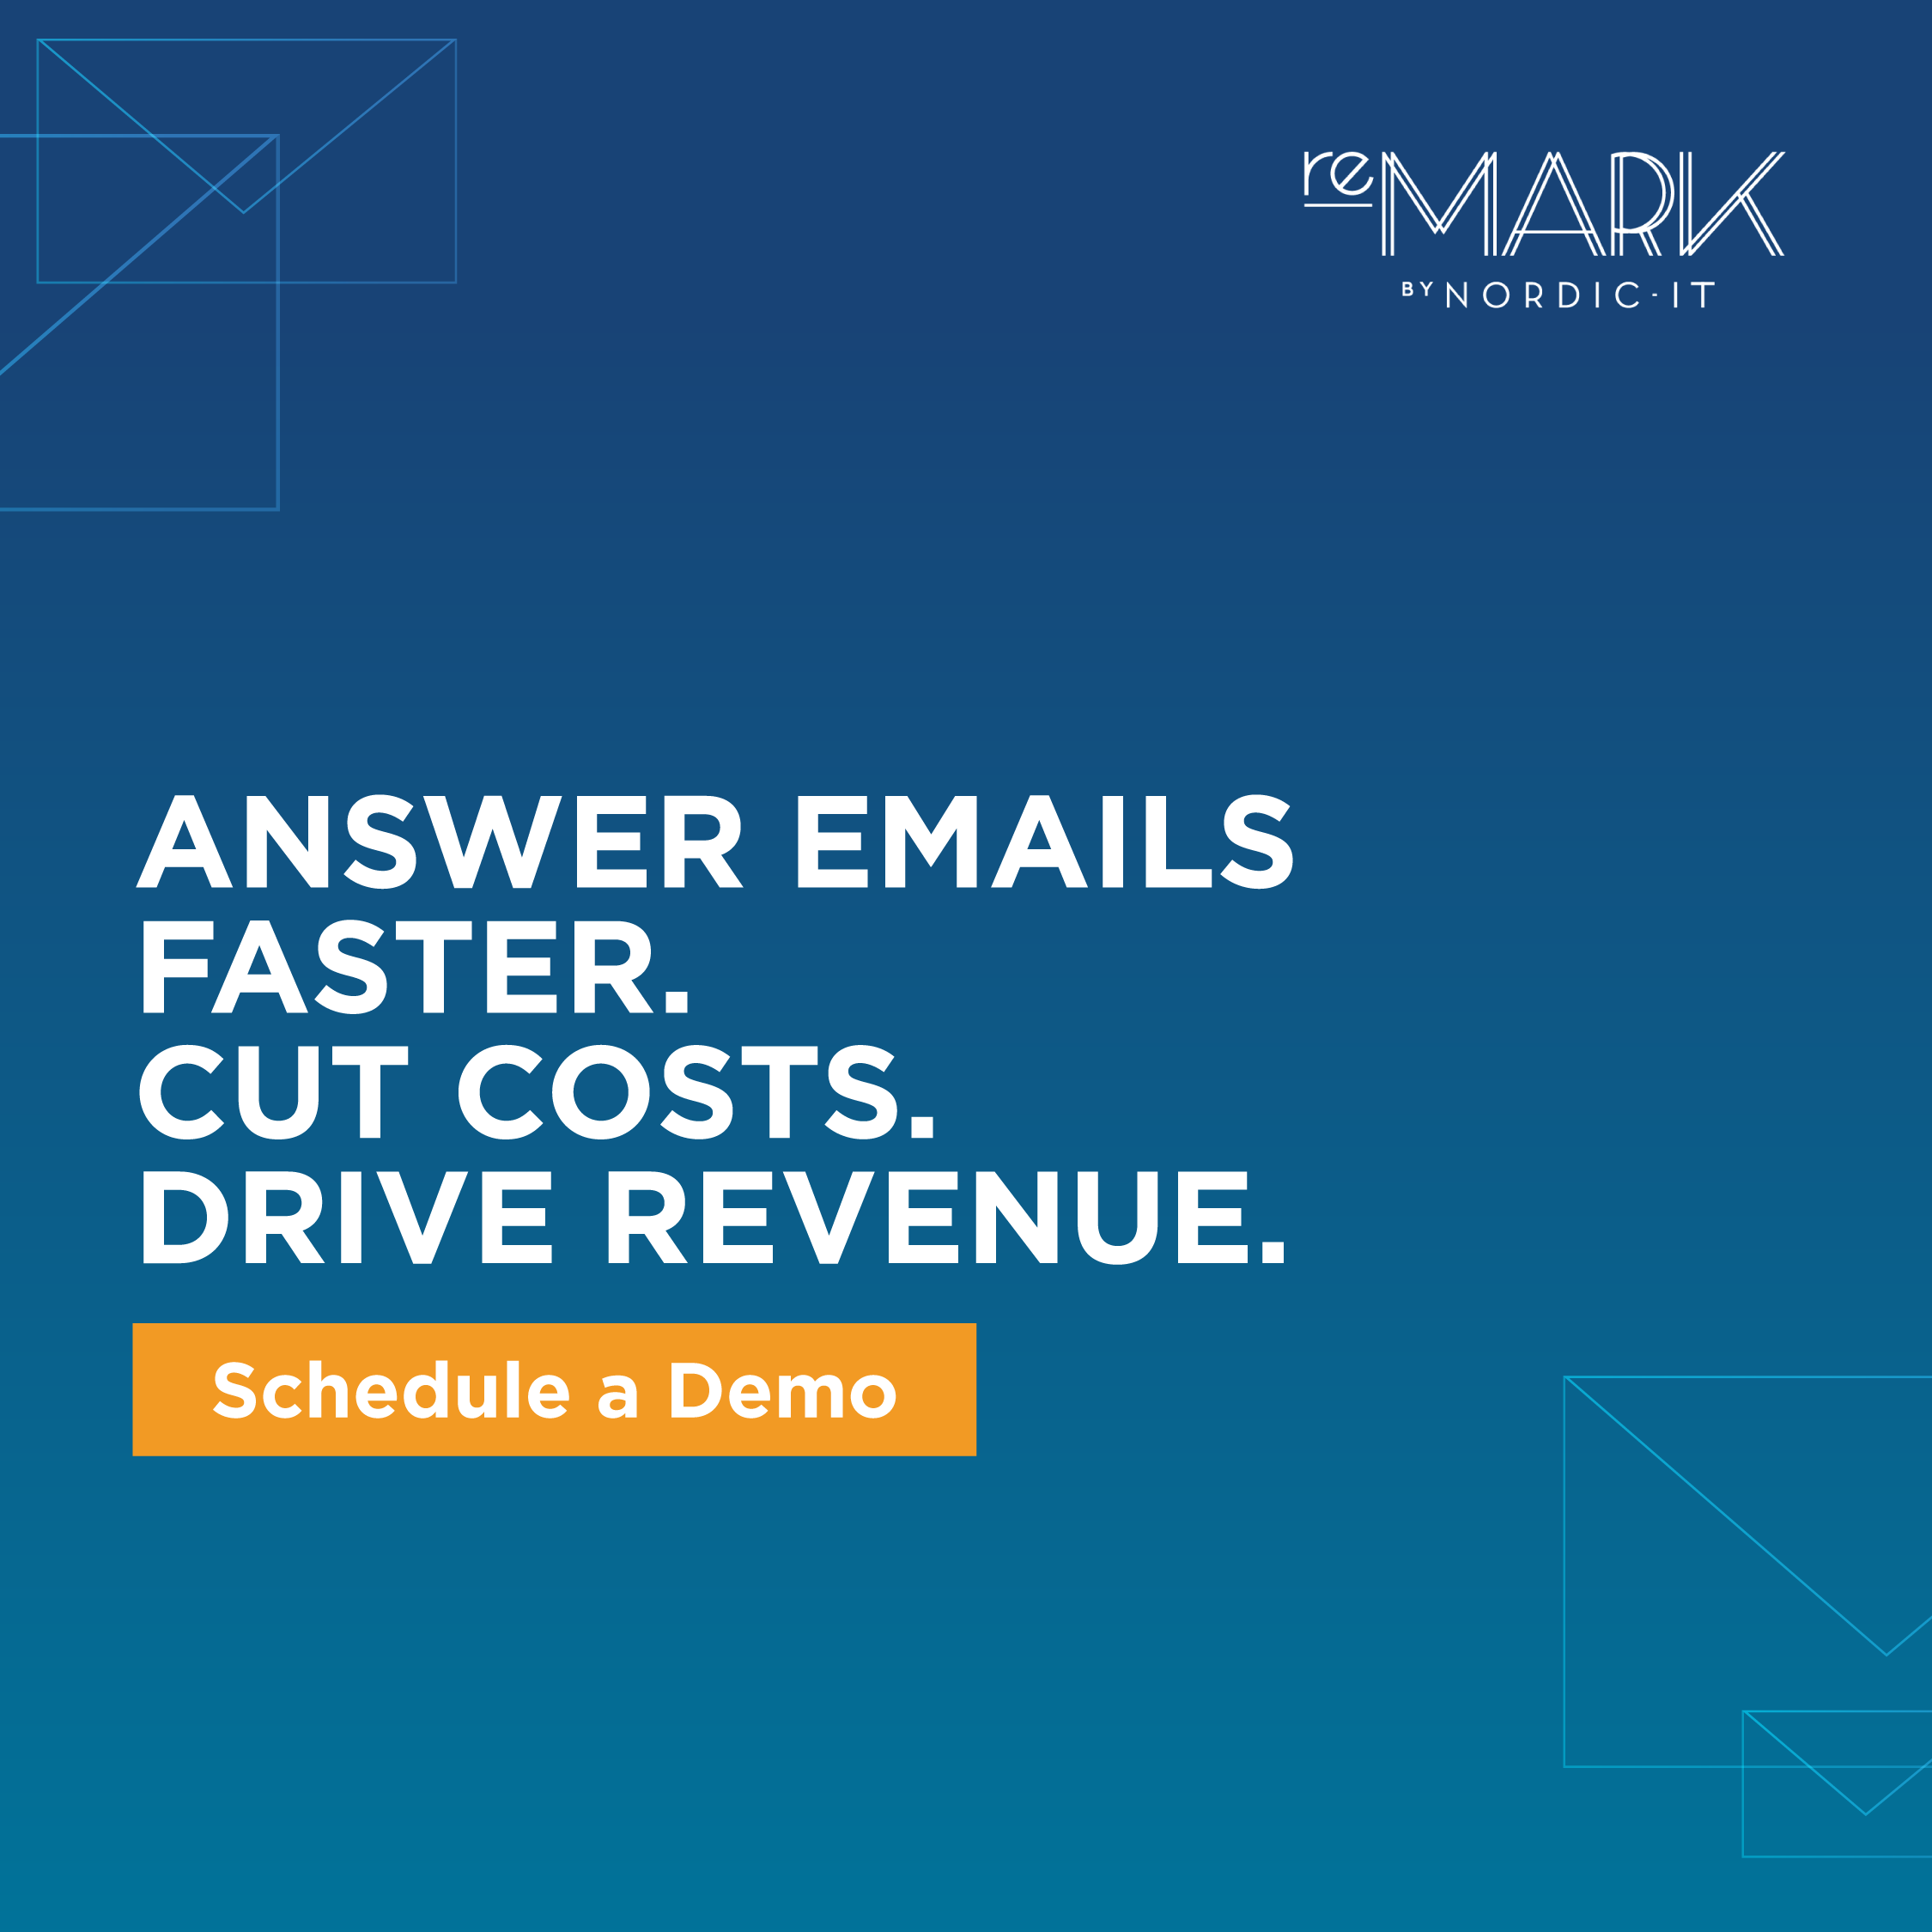 Answer emails faster, Cut costs, and drive revenue with reMARK by Nordic IT